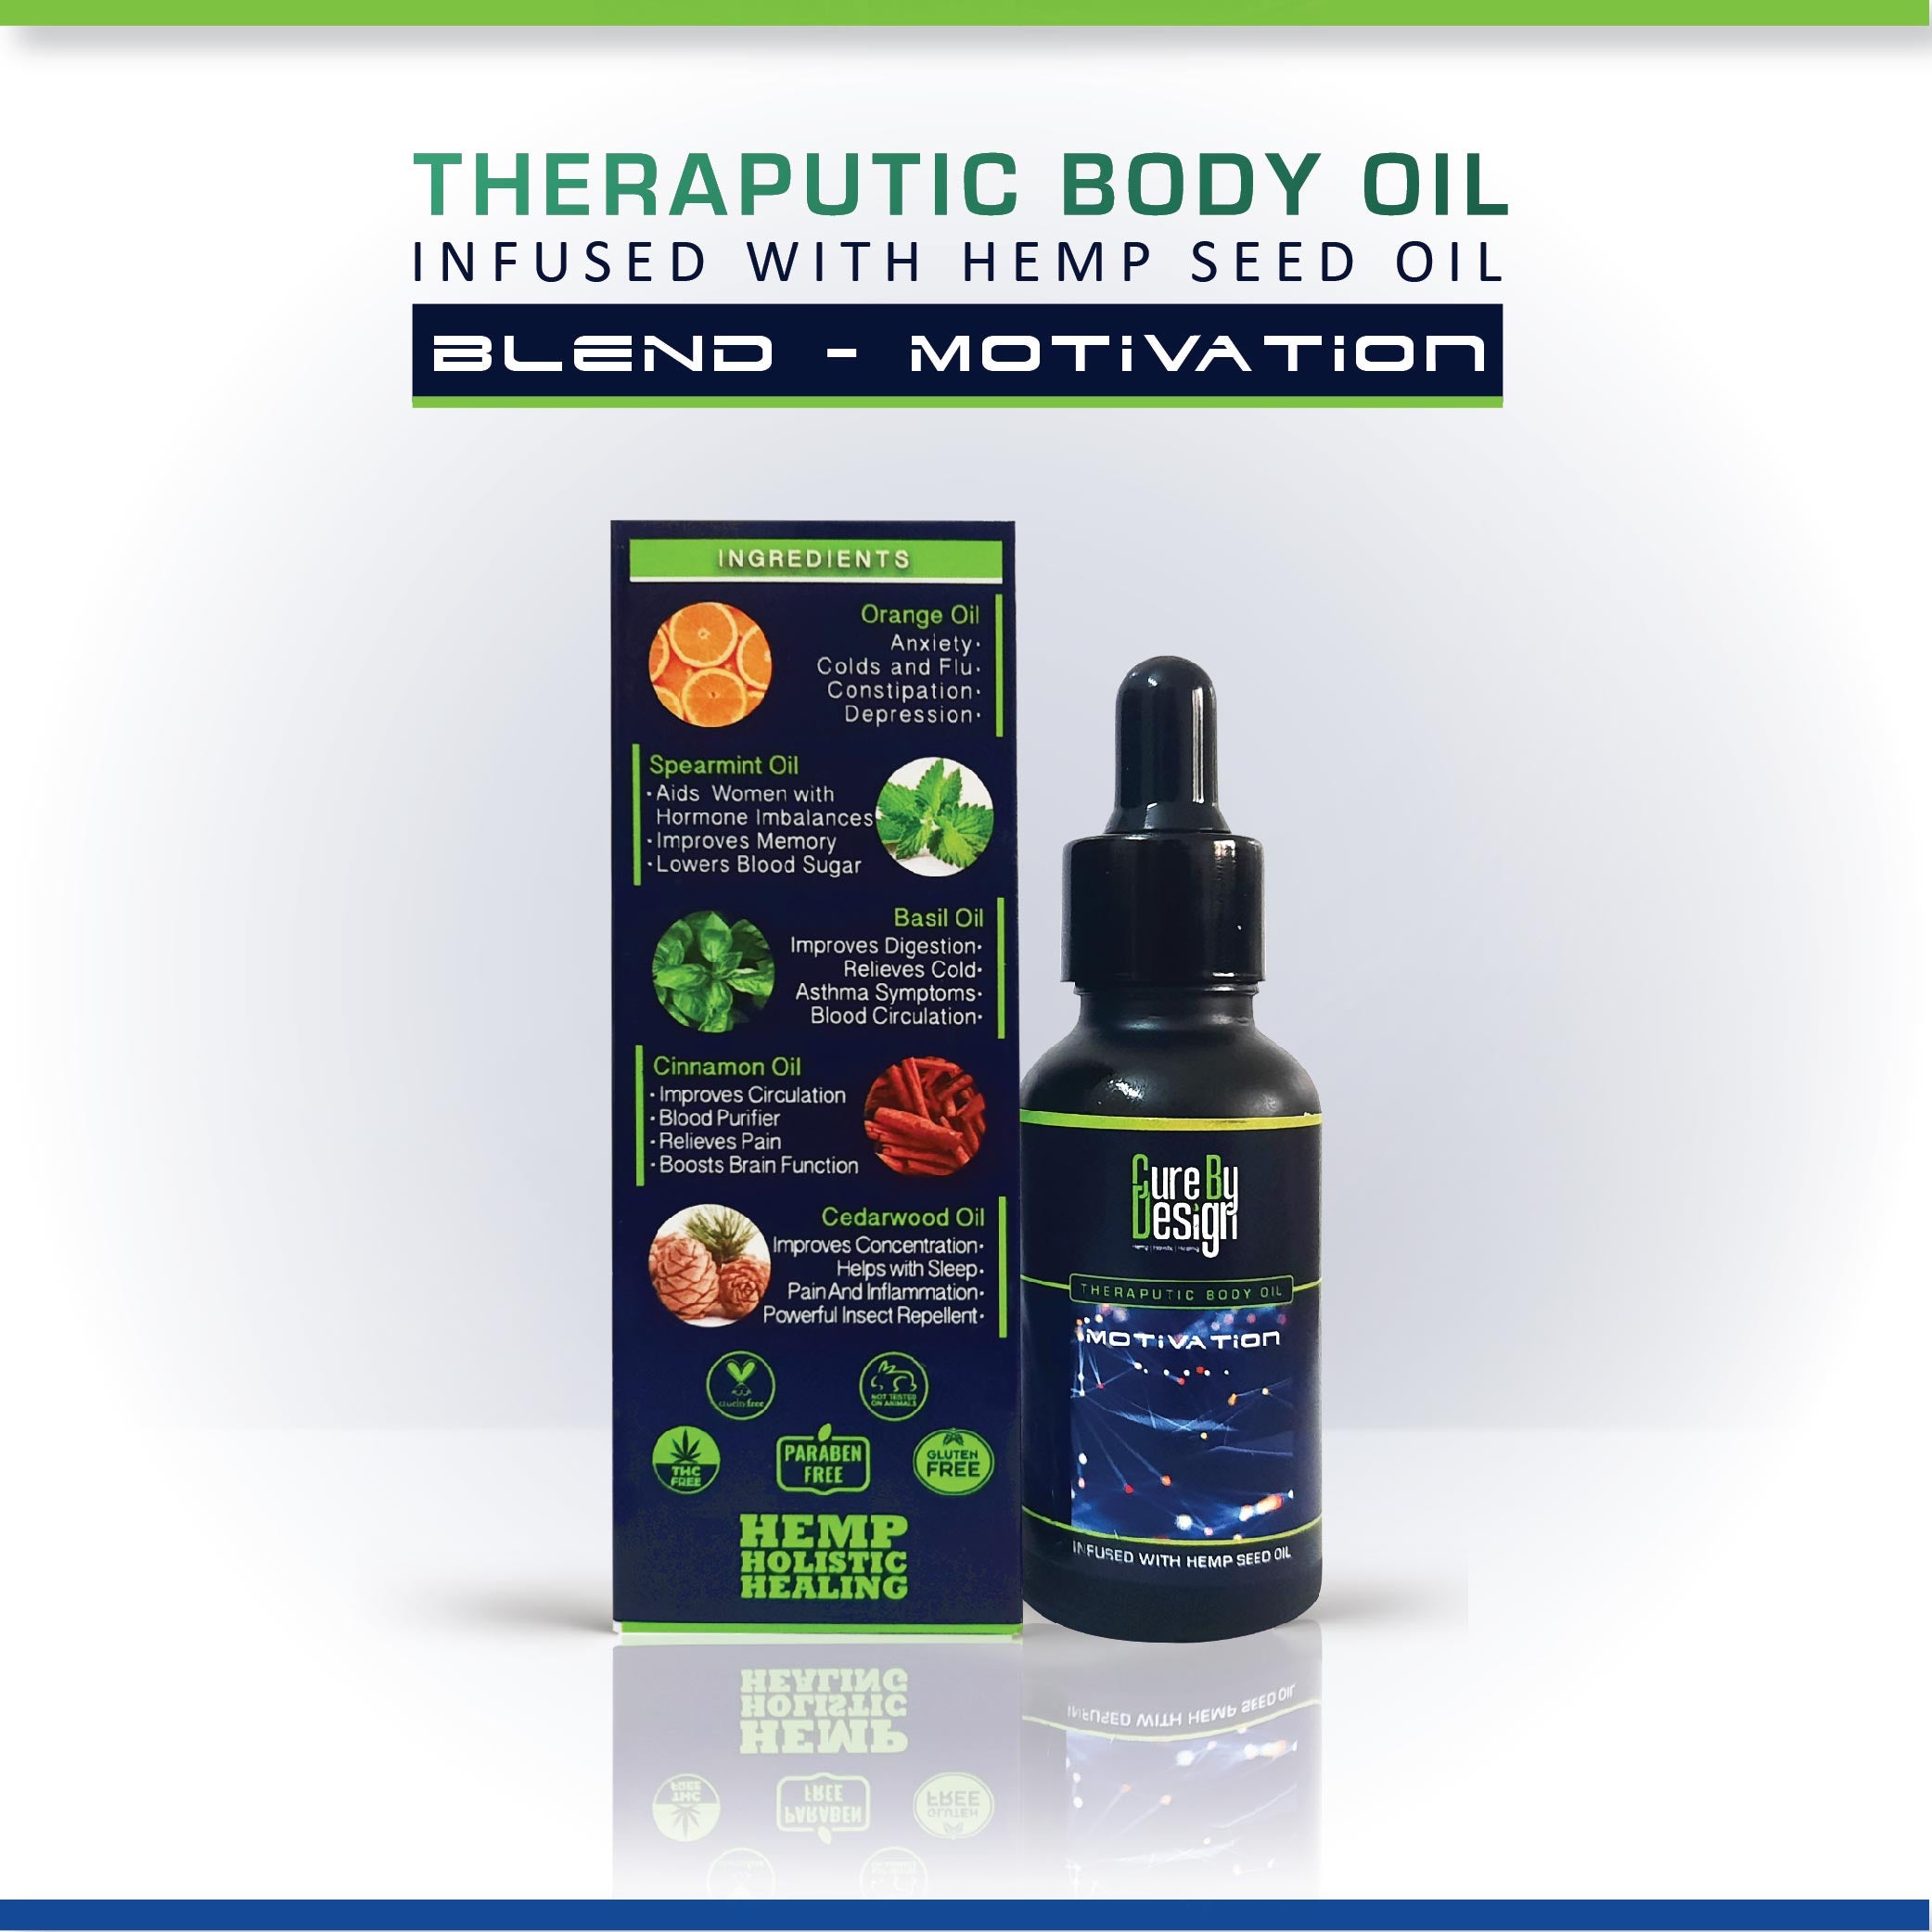 Cure By Design Therapeutic Healing Blend - Motivation